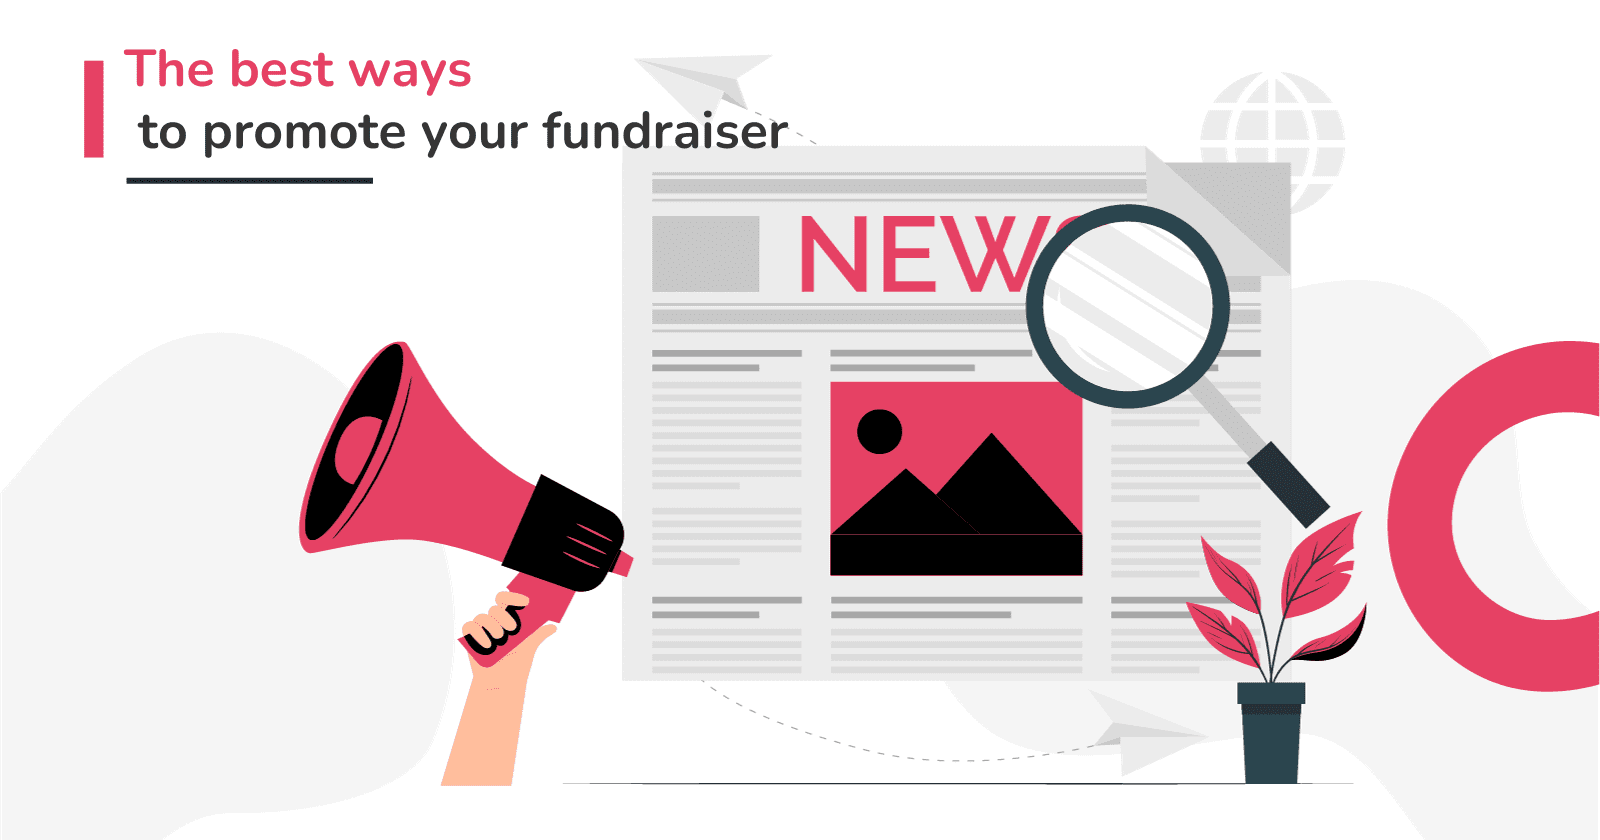 The best ways to promote your fundraiser